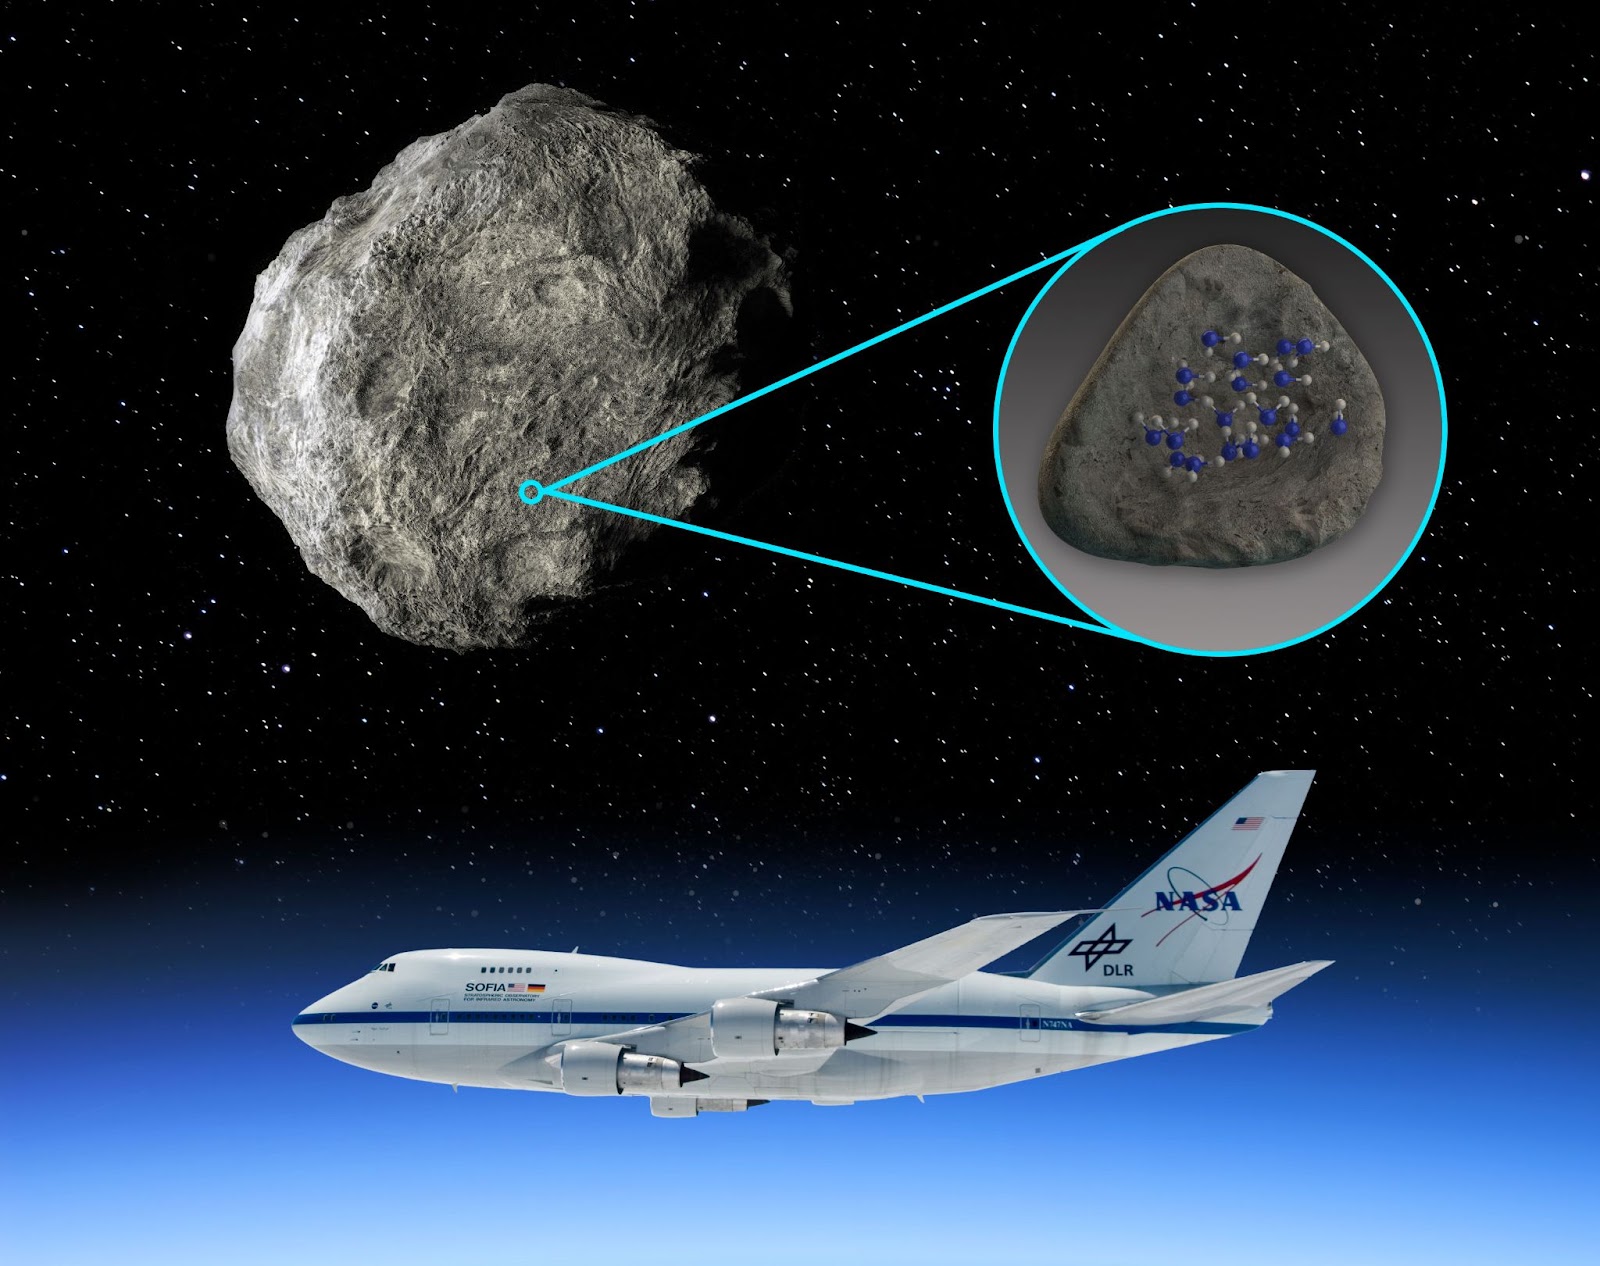 An illustration of a airplane in flight and an asteroid